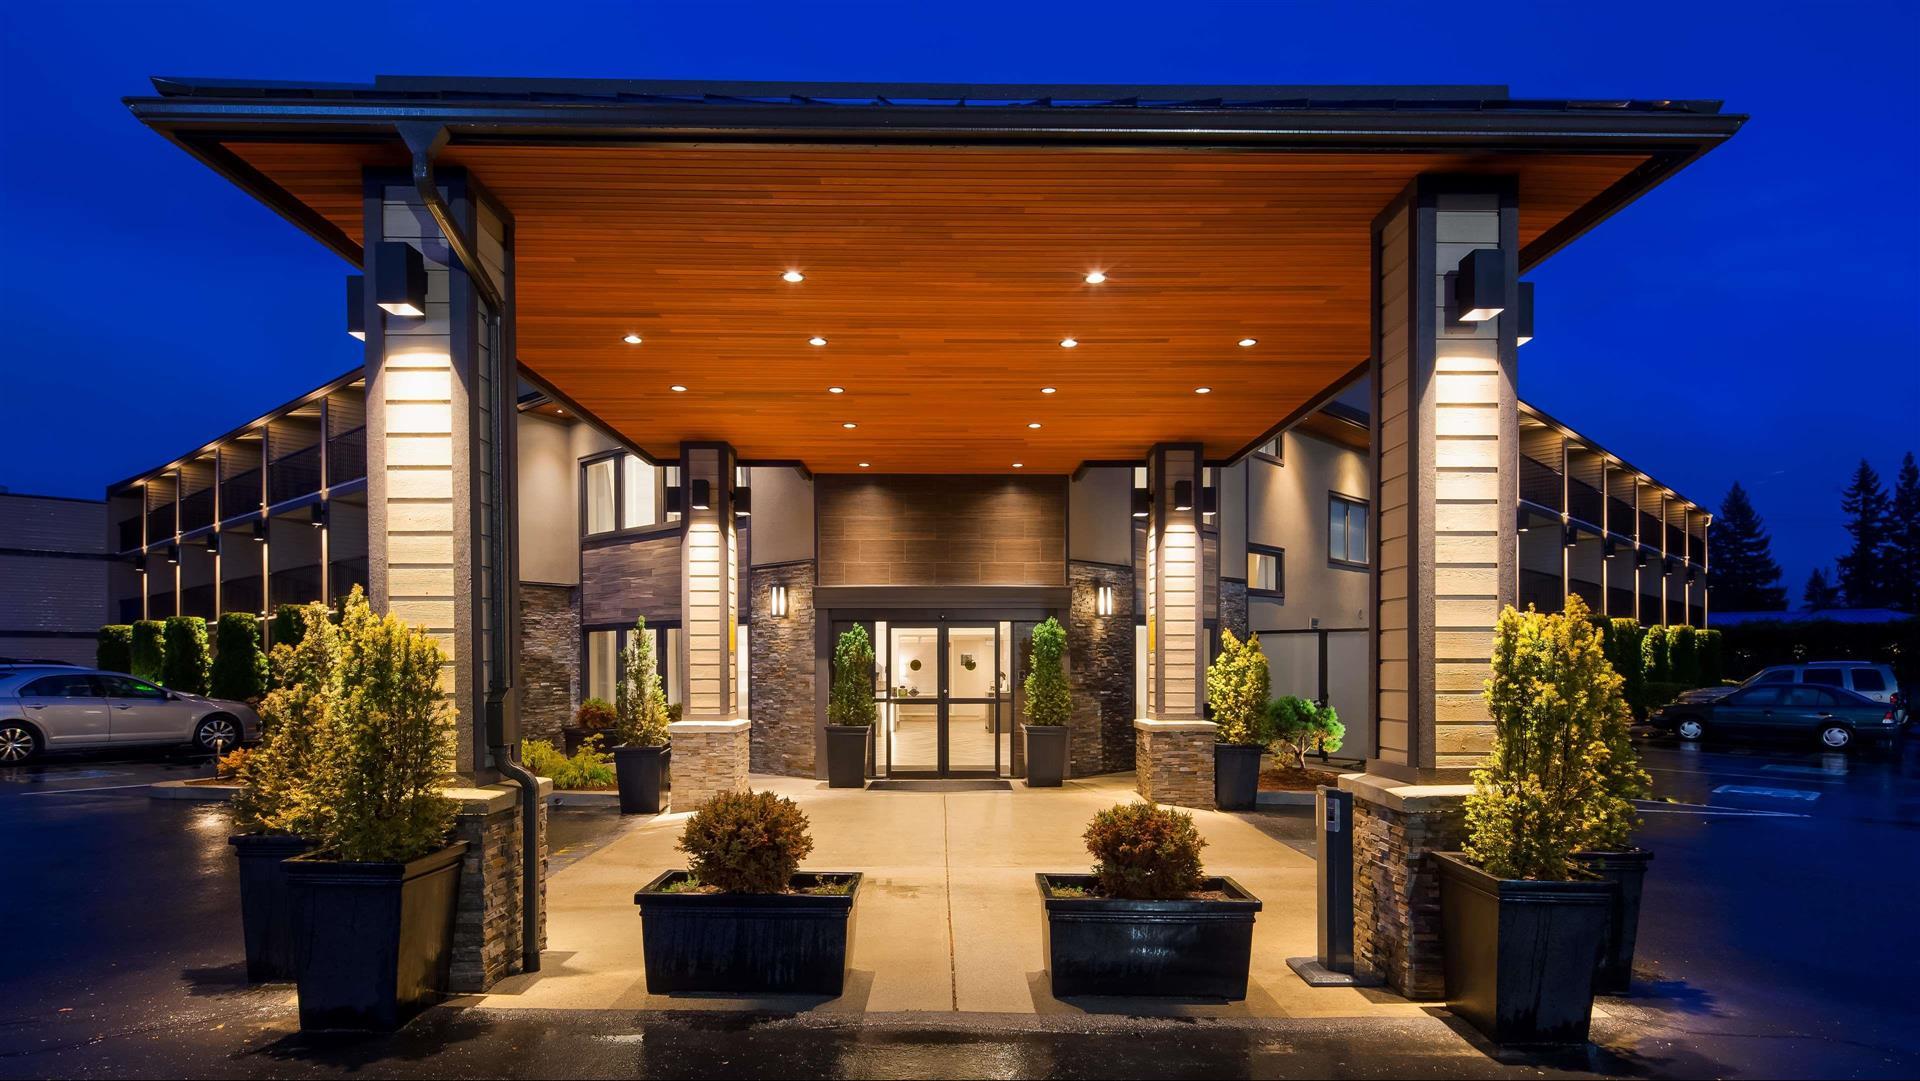 Best Western Northgate Inn in Nanaimo, BC